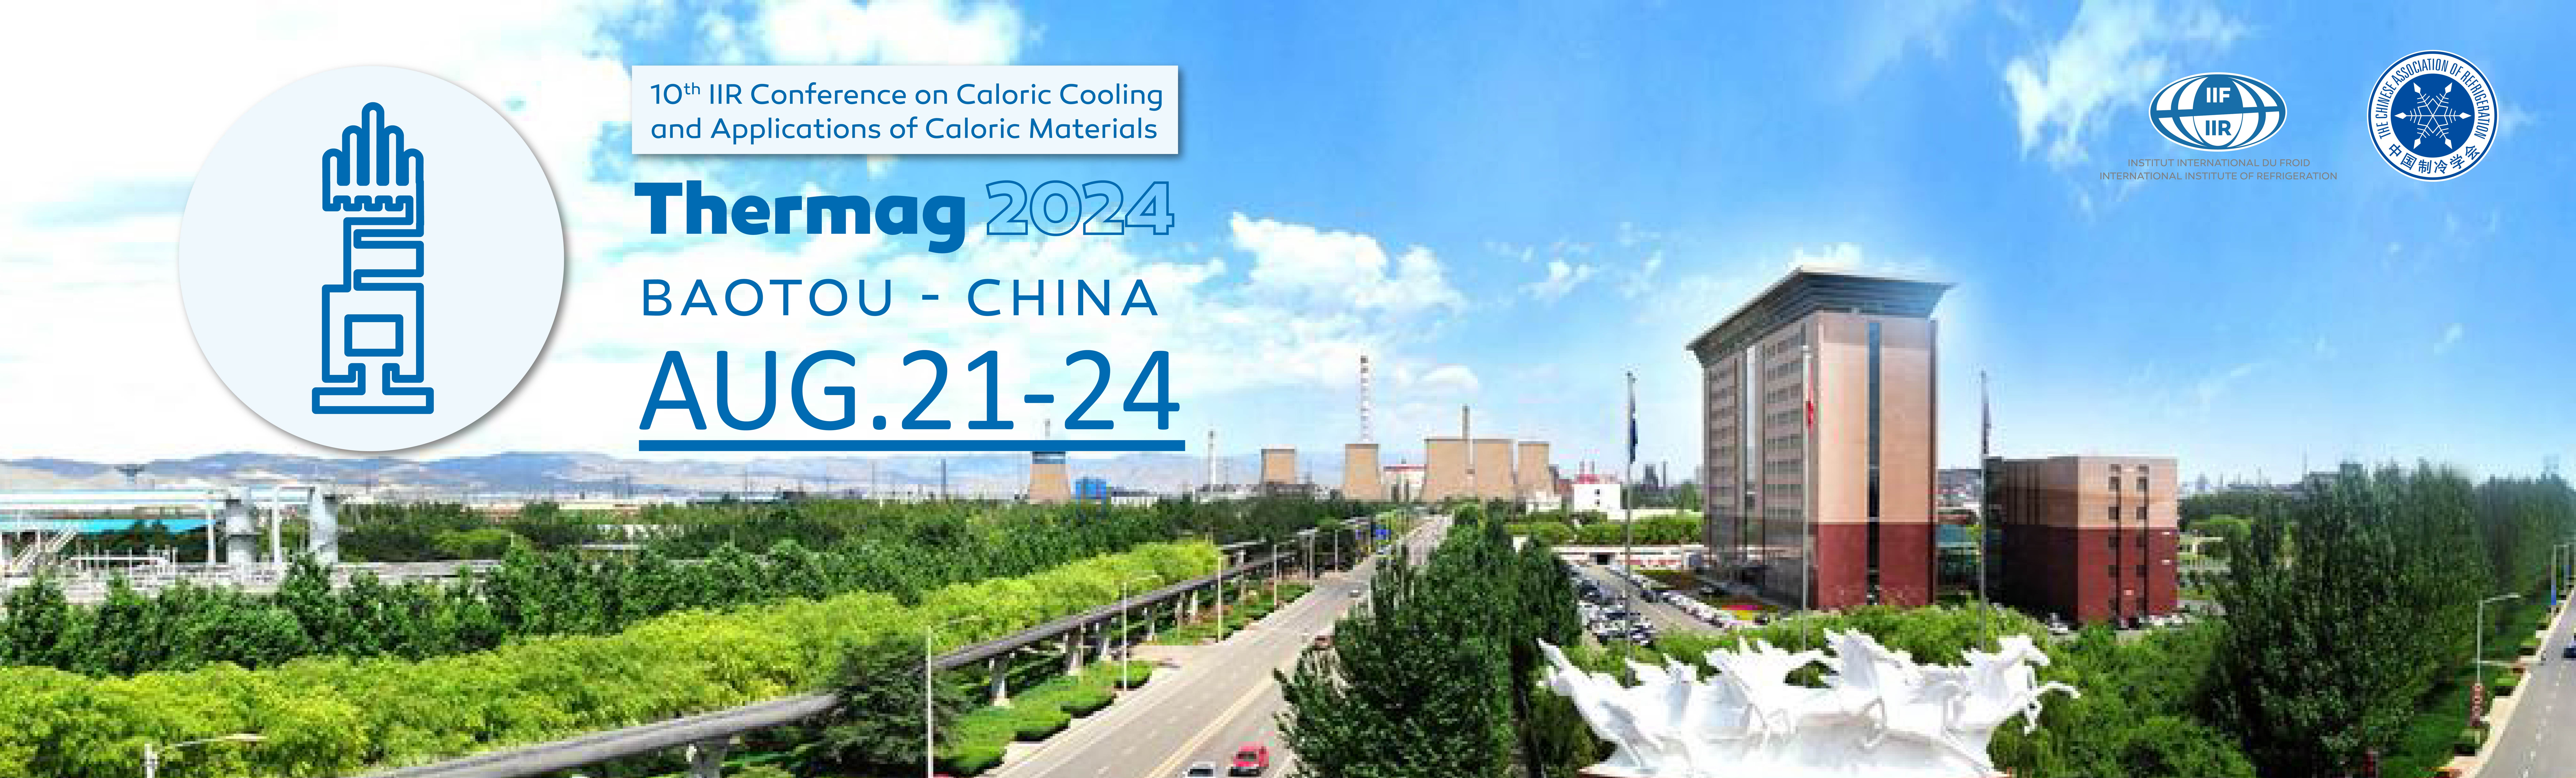 10th IIR International Conference on Caloric Cooling and Applications of Caloric Materials (THERMAG 2024)